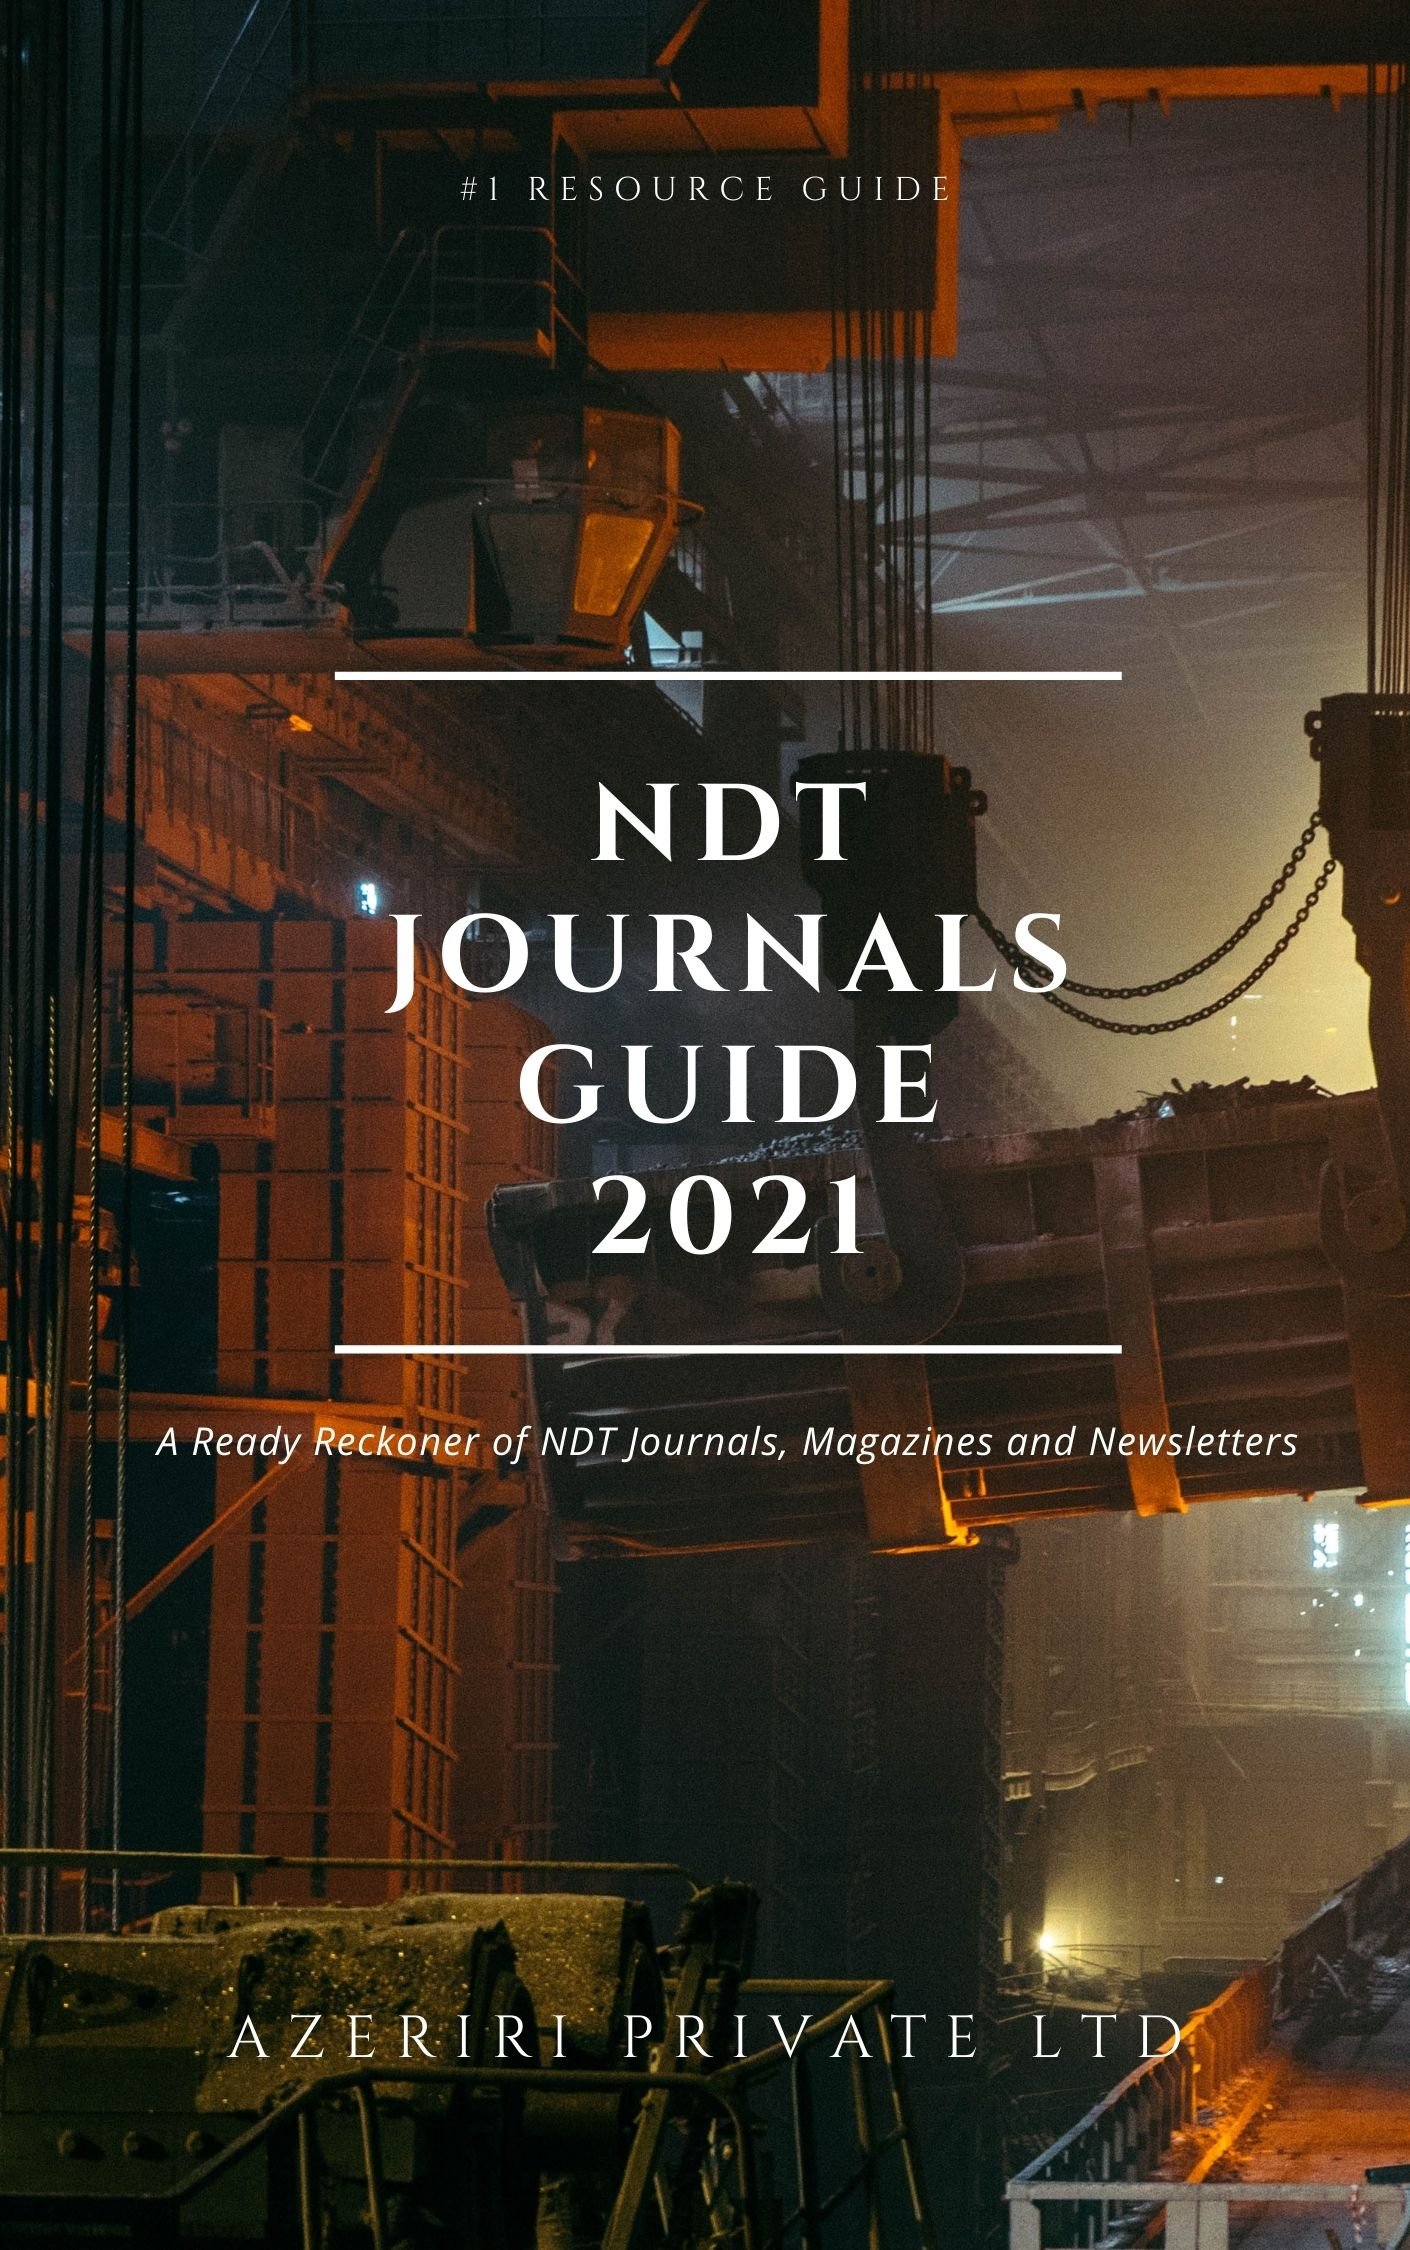 NDT Journals of the world